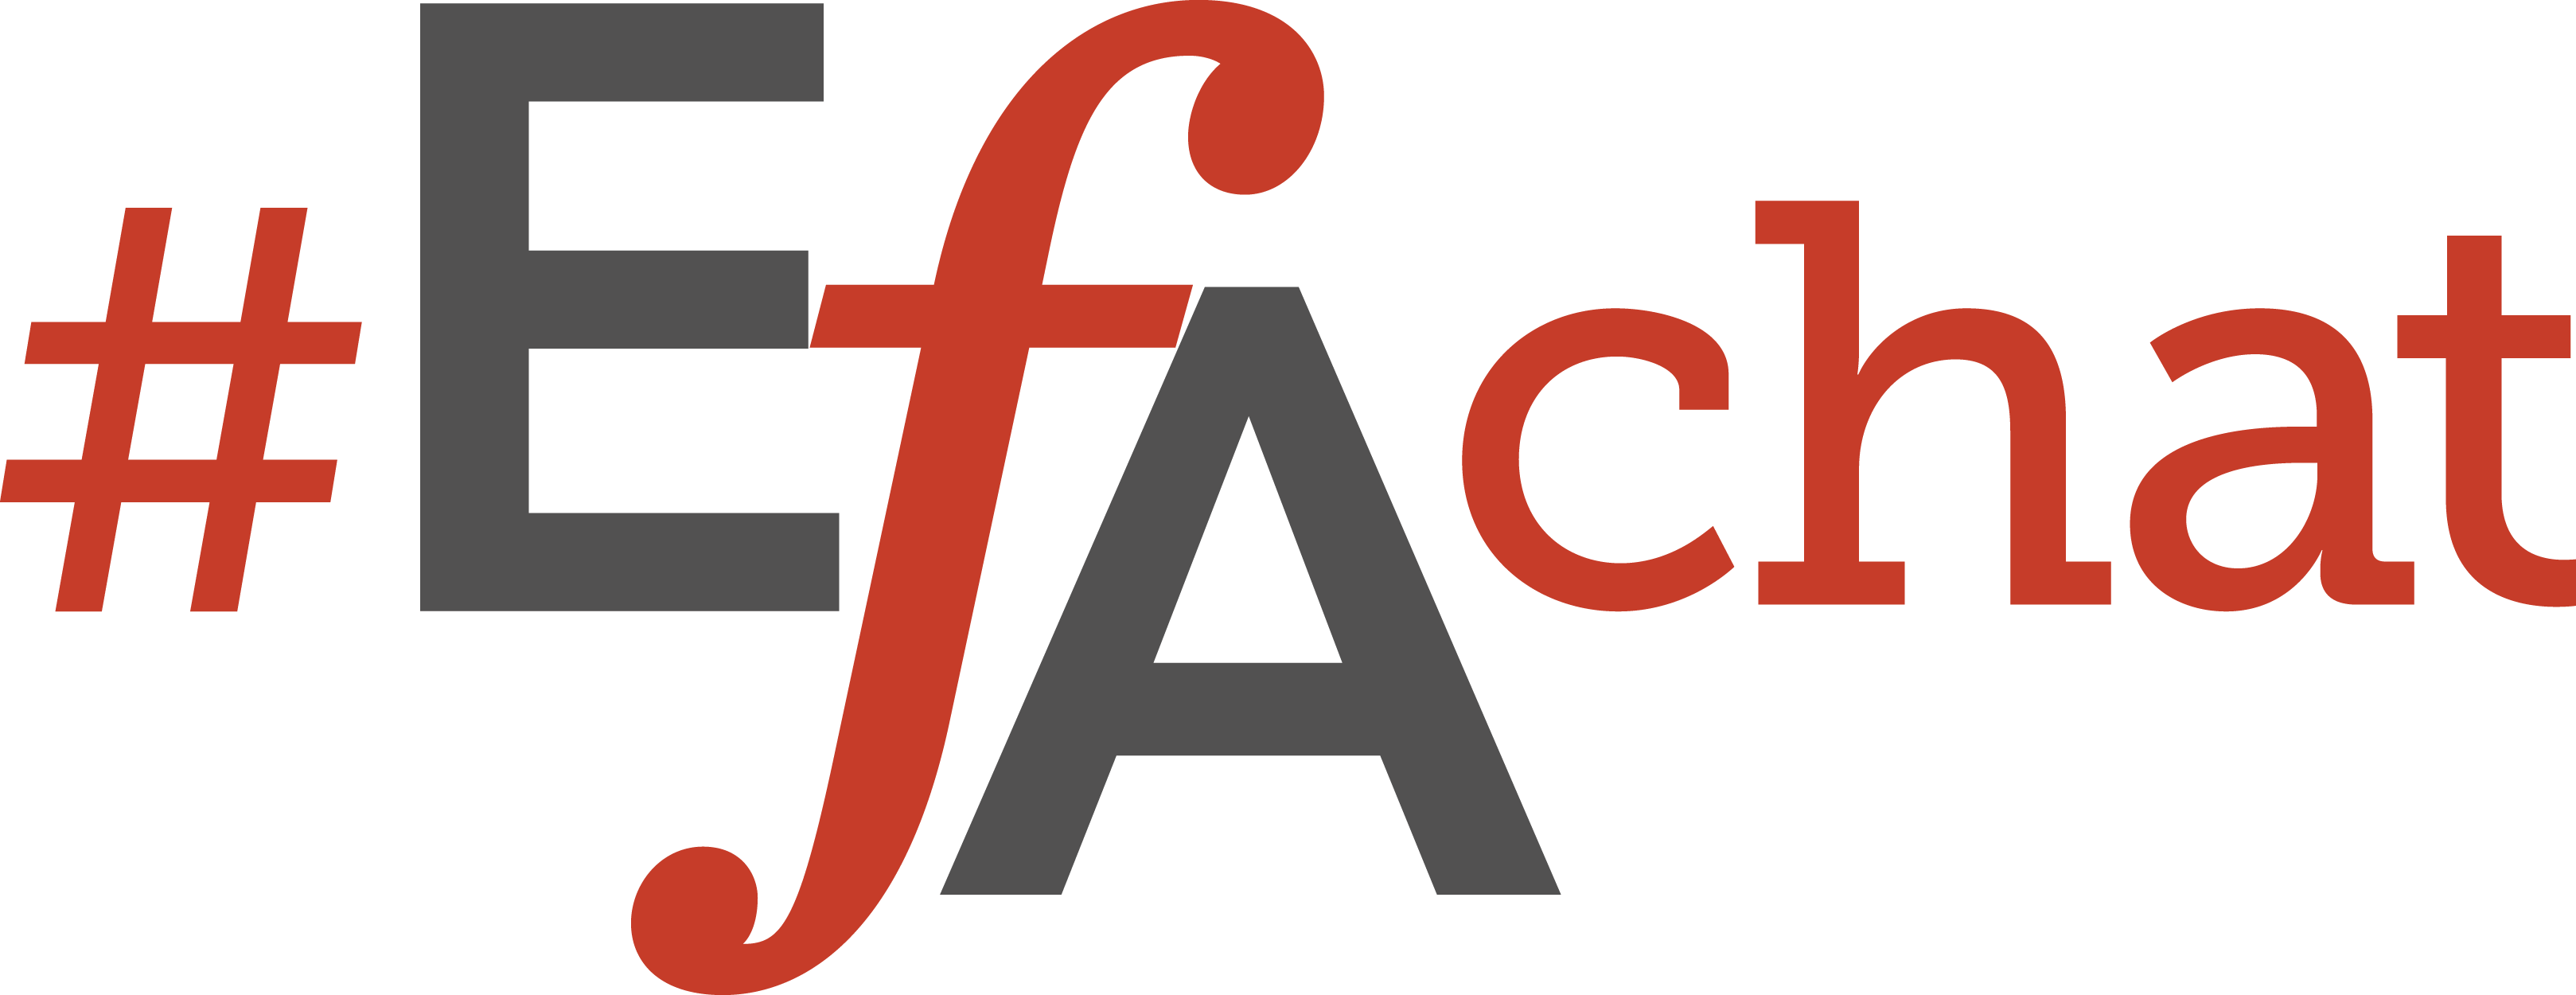 #EFAChat Logo in red and dark gray.